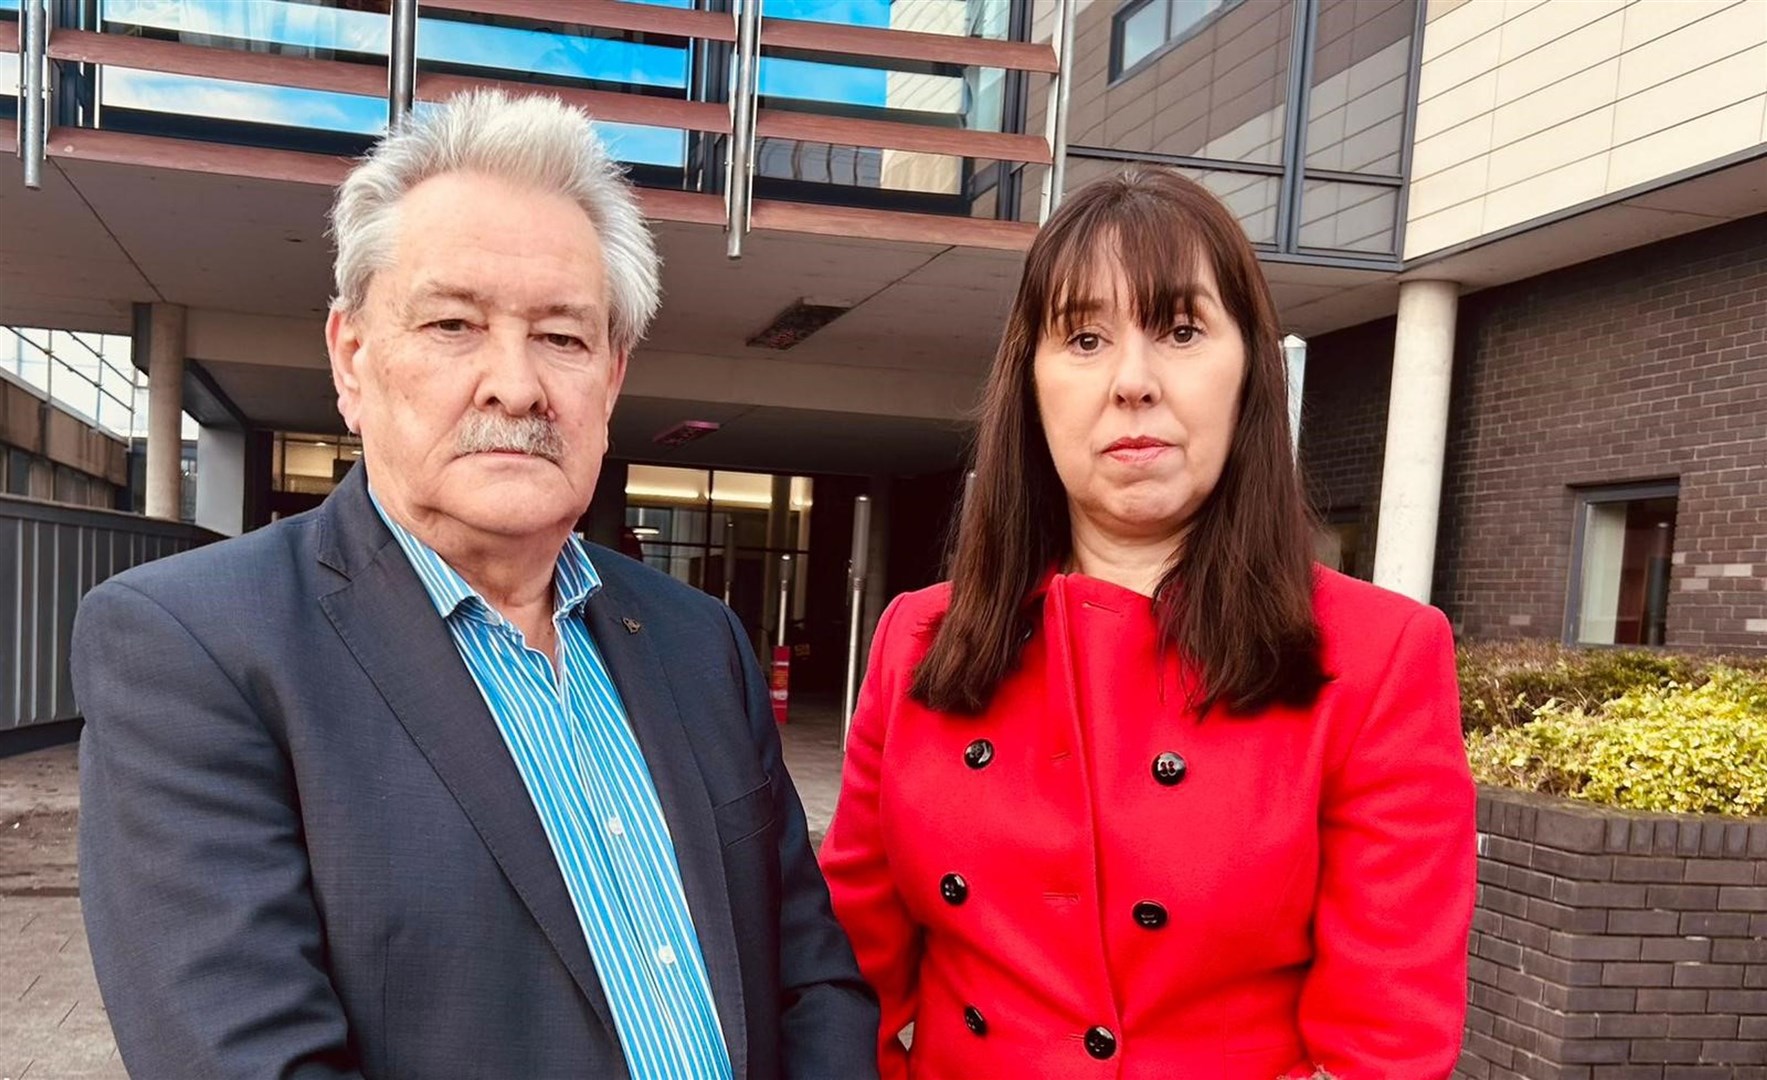 Handout photo issued by the South Eastern Trust’s of their chief executive Roisin Coulter and the trust’s medical director Dr Charlie Martyn, speaking to media at the Ulster Hospital in Dundonald.